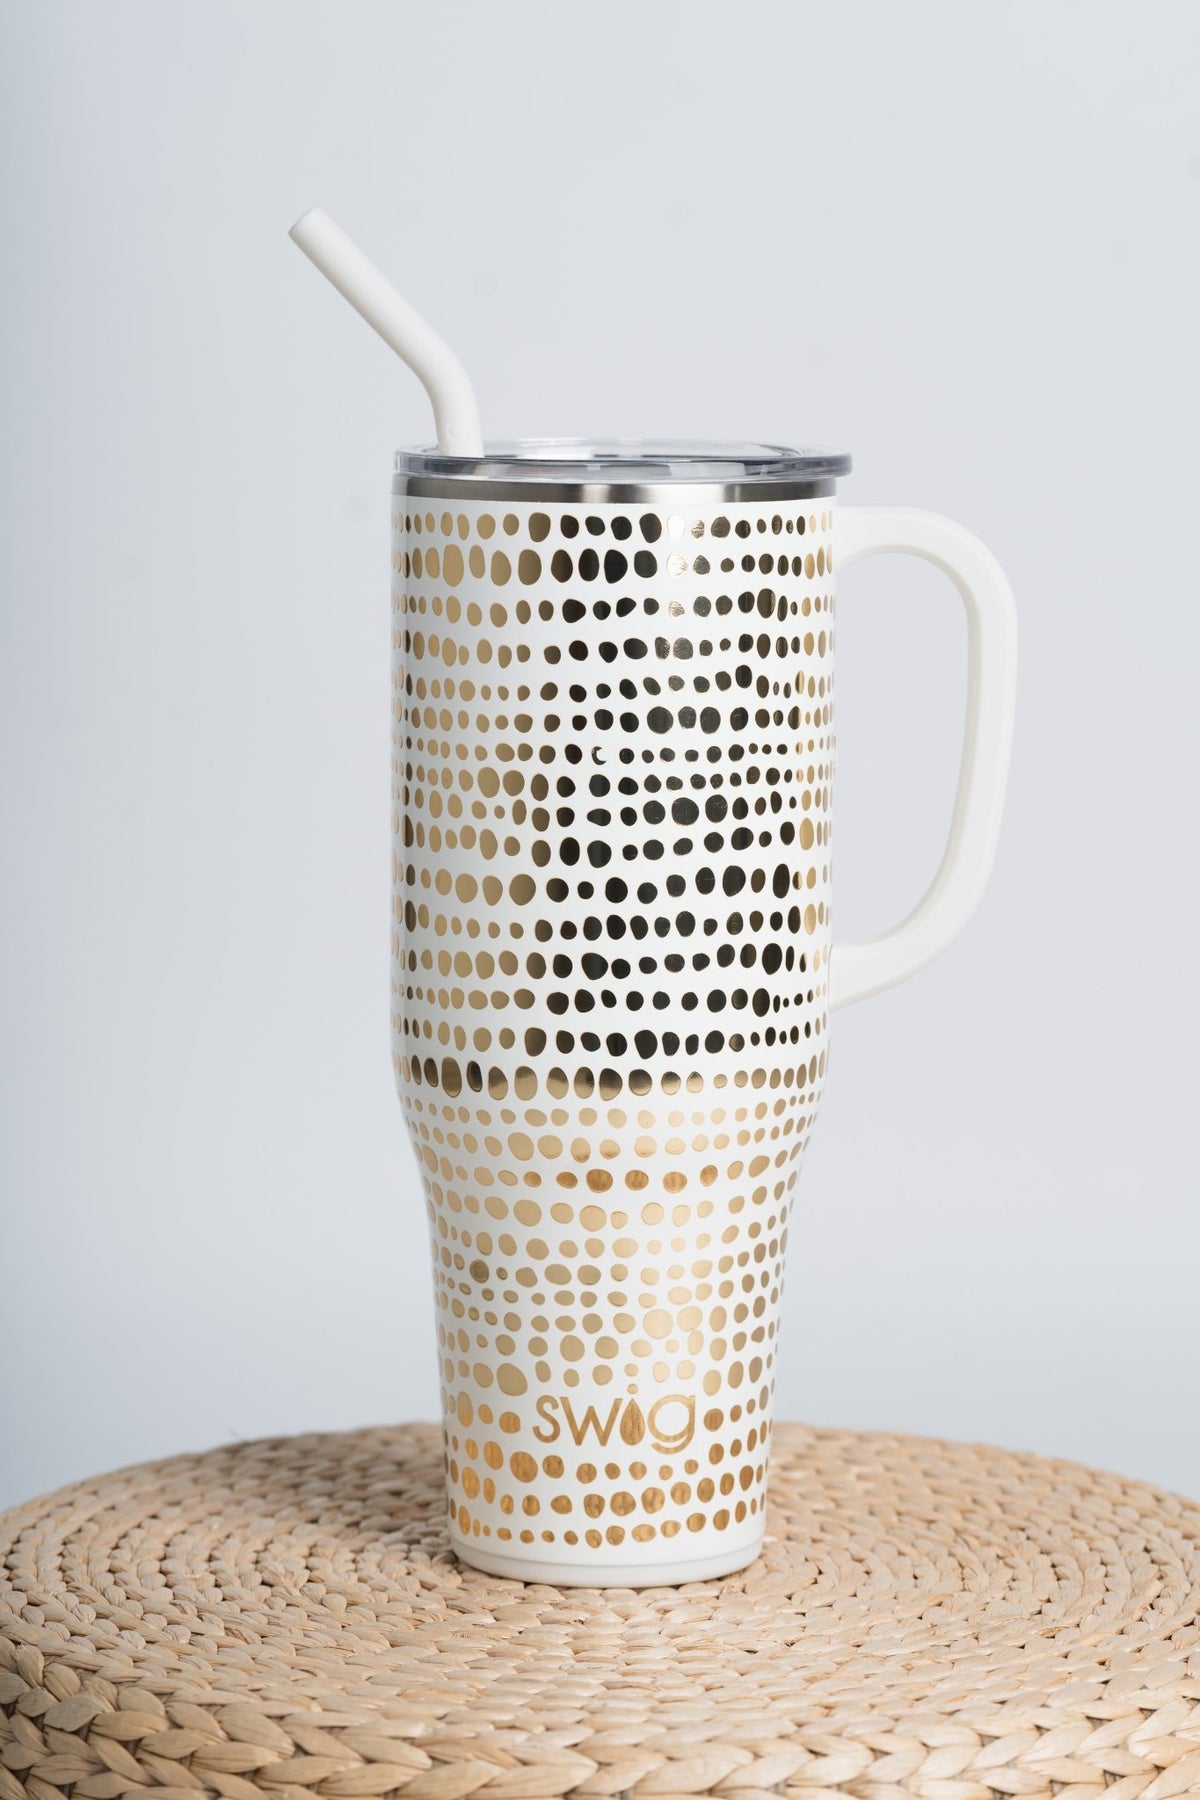 Swig glamazon gold 40oz tumbler - Trendy Tumblers, Mugs and Cups at Lush Fashion Lounge Boutique in Oklahoma City